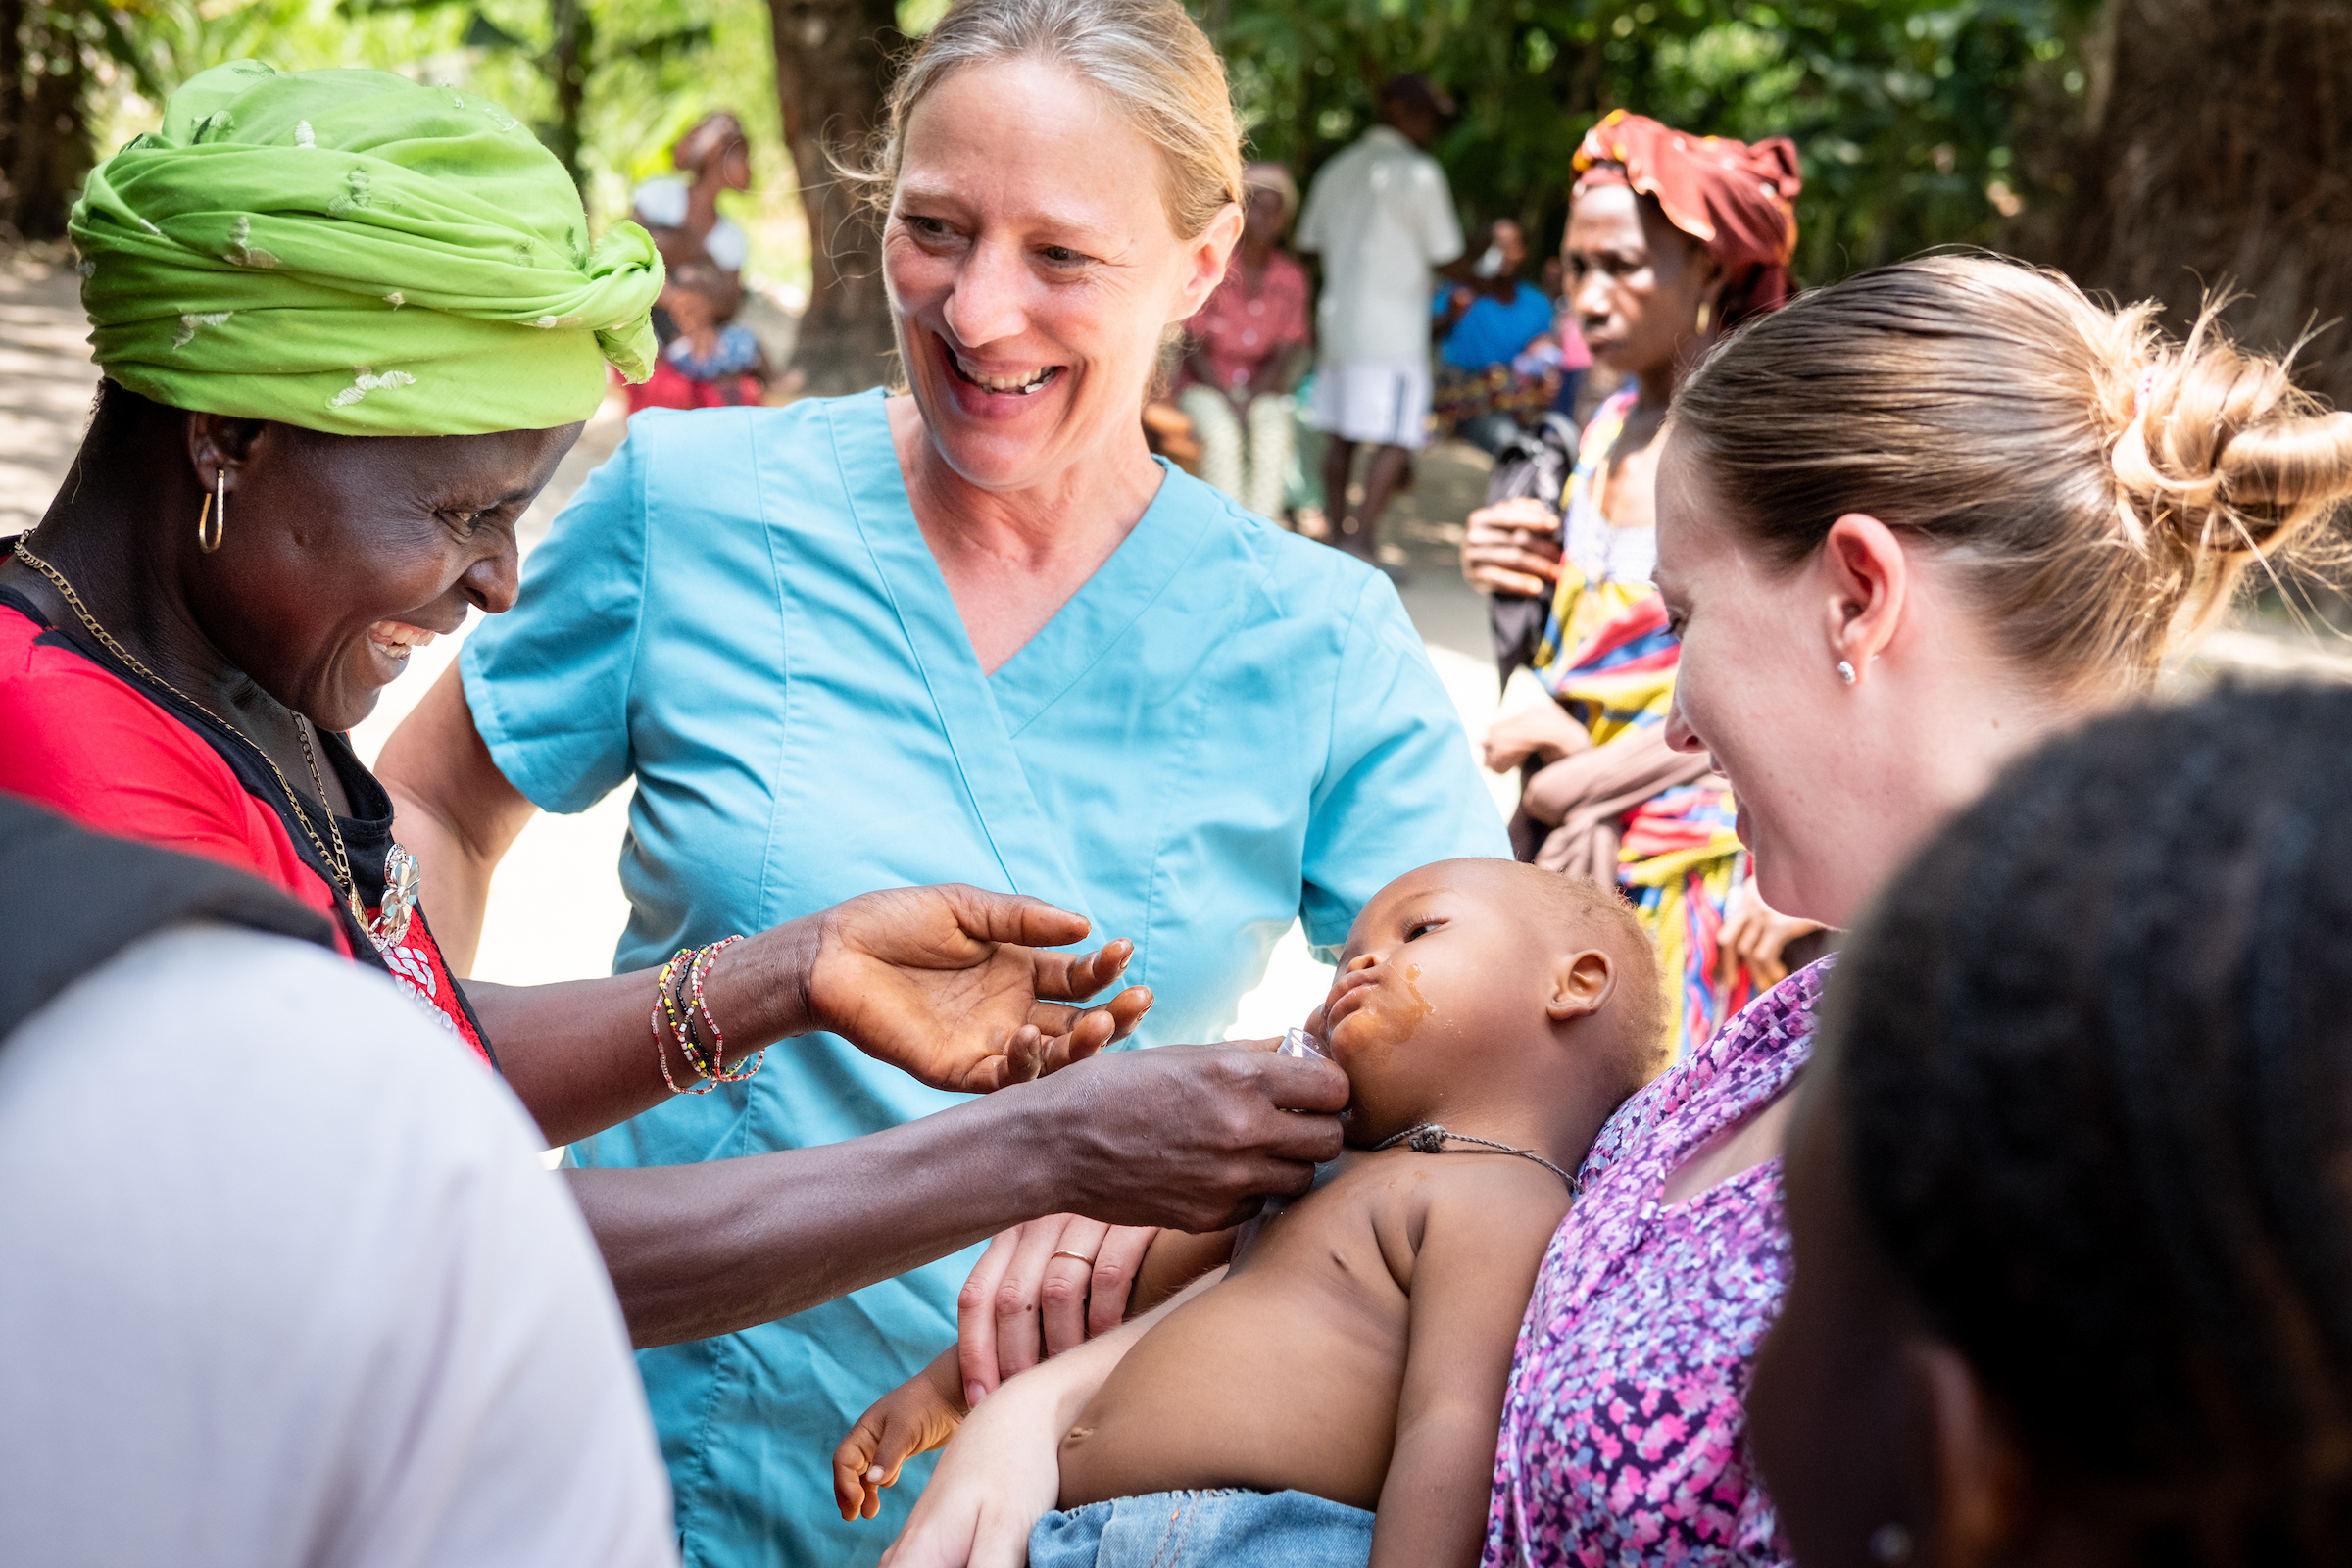 A mother gives medicine to her baby as LCMS missionaries Stephanie Schulte and Molly Christensen assist on the fifth day of the LCMS Mercy Medical Team on Friday, May 11, 2018, in the Yardu village outside Koidu, Sierra Leone, West Africa. LCMS Communications/Erik M. Lunsford